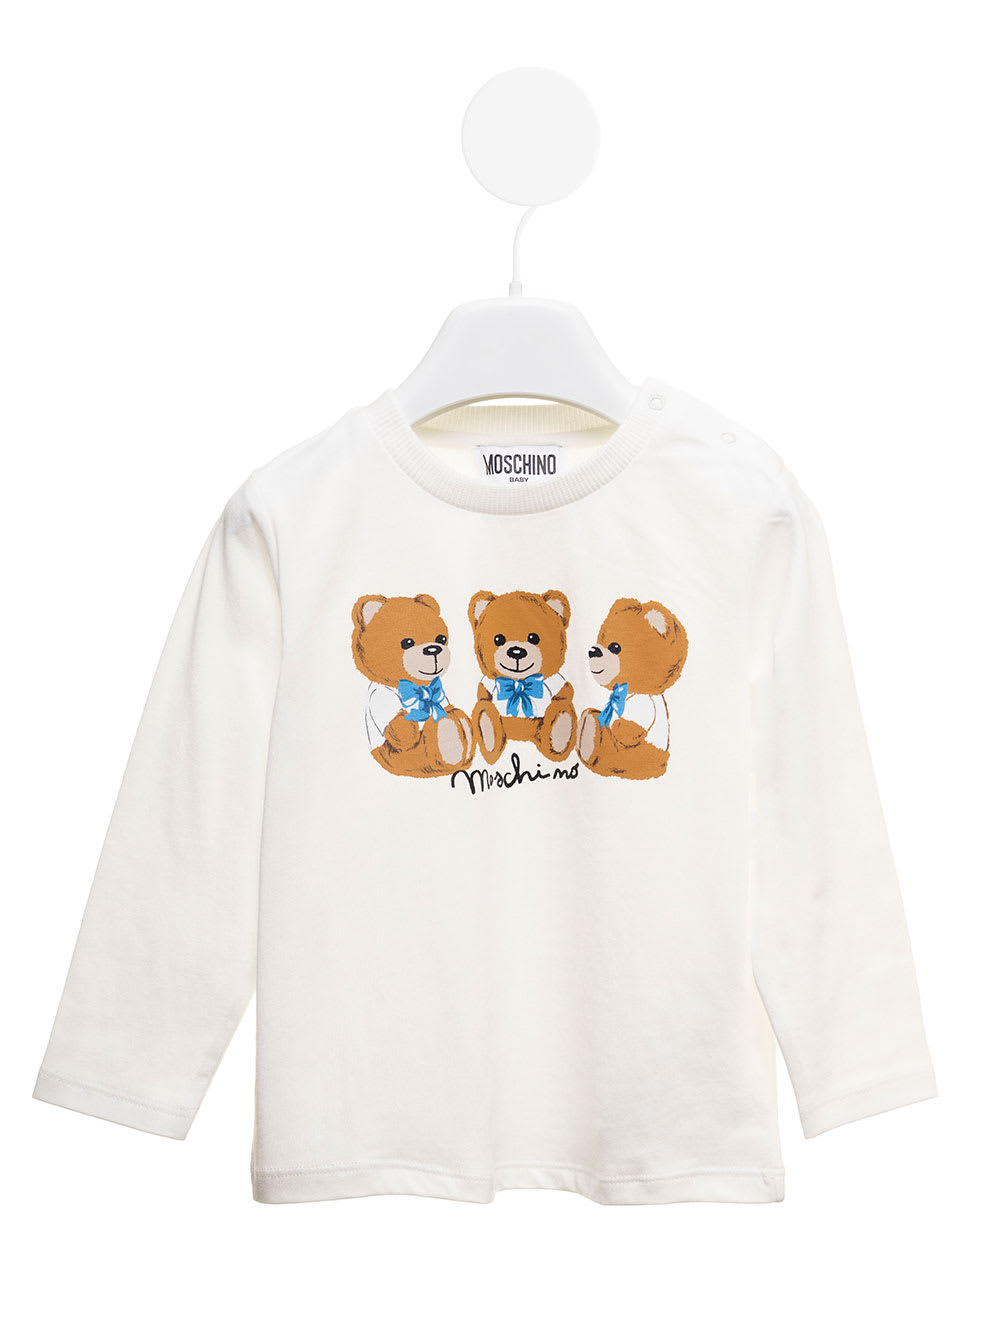 Long-sleeved White Cotton T-shirt With Teddy Bear Print Moschino Kids Baby Boy